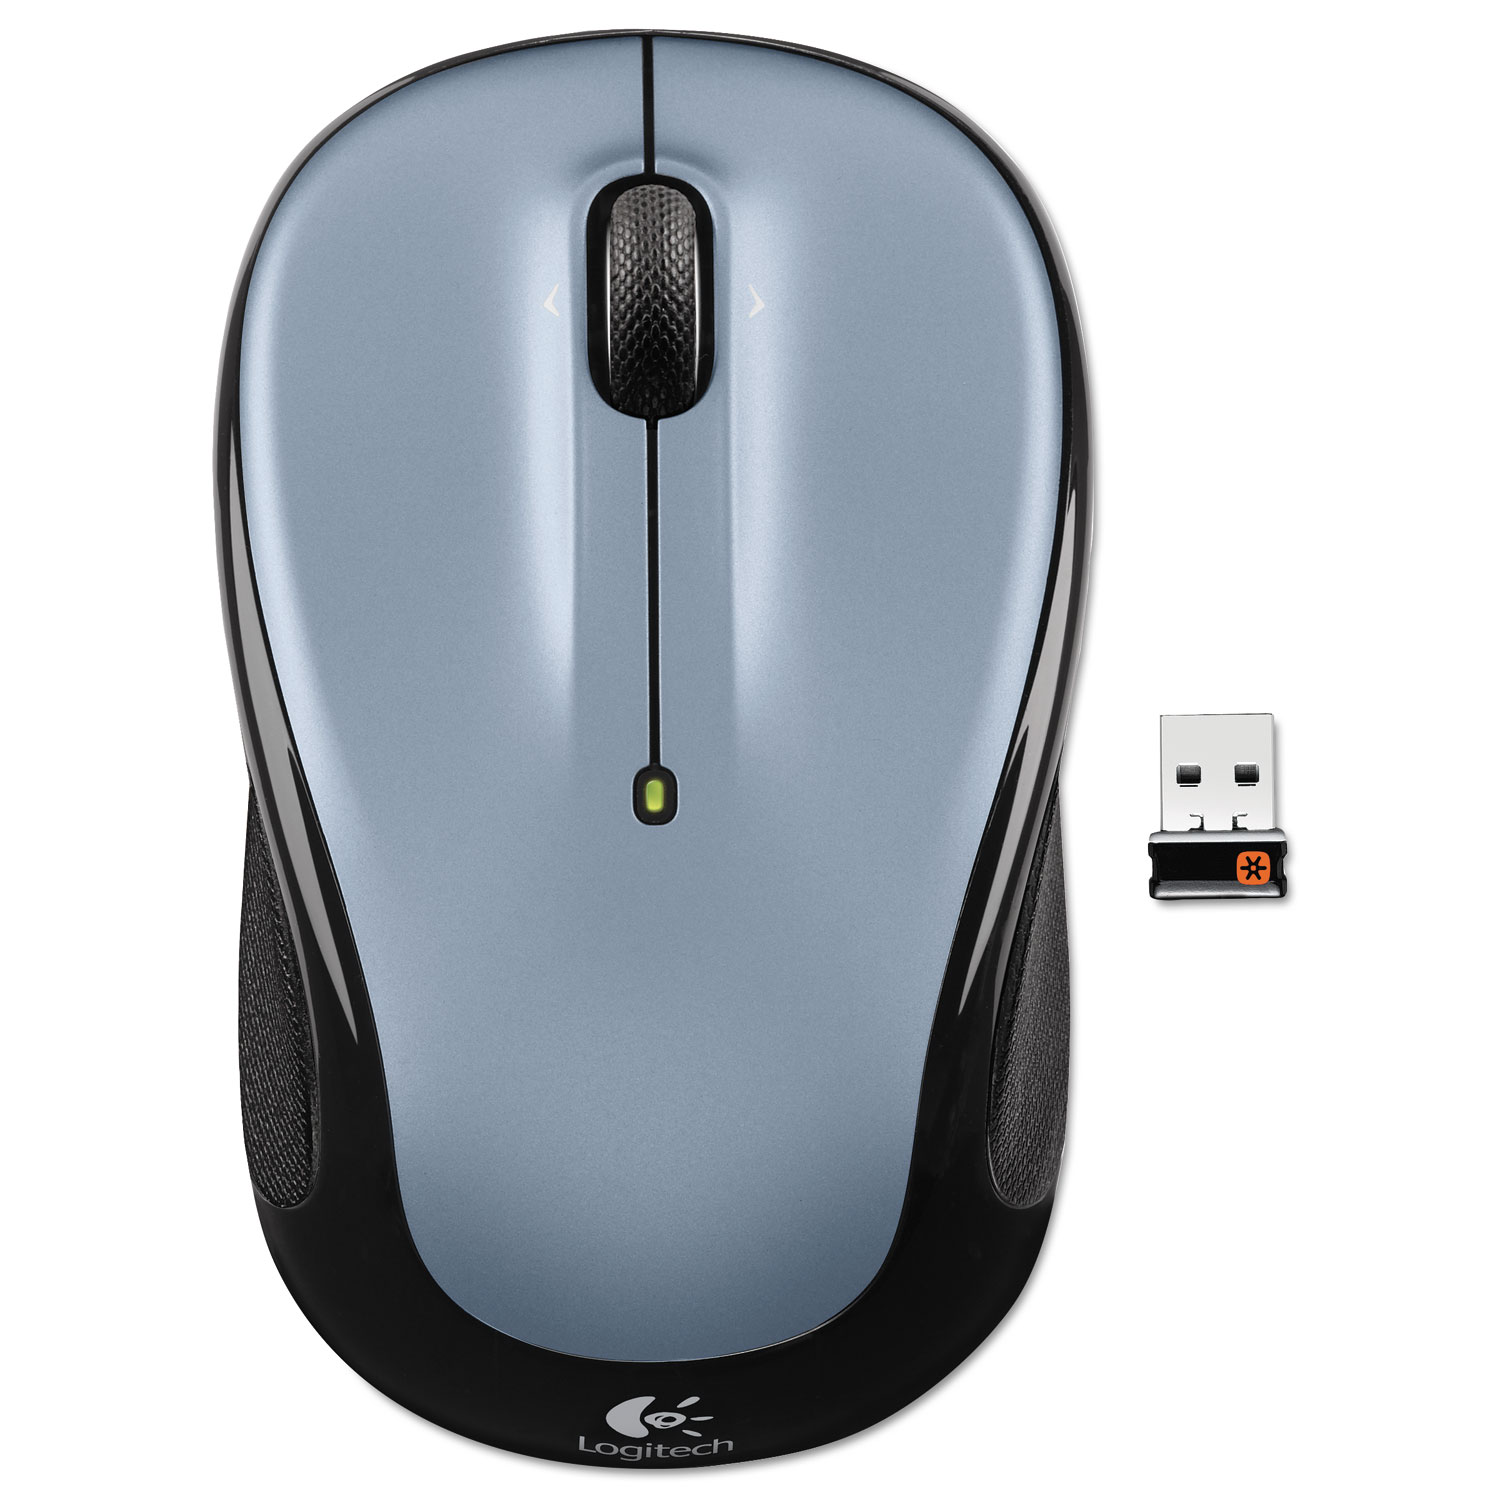 M325 Wireless Mouse, Right/Left, Silver